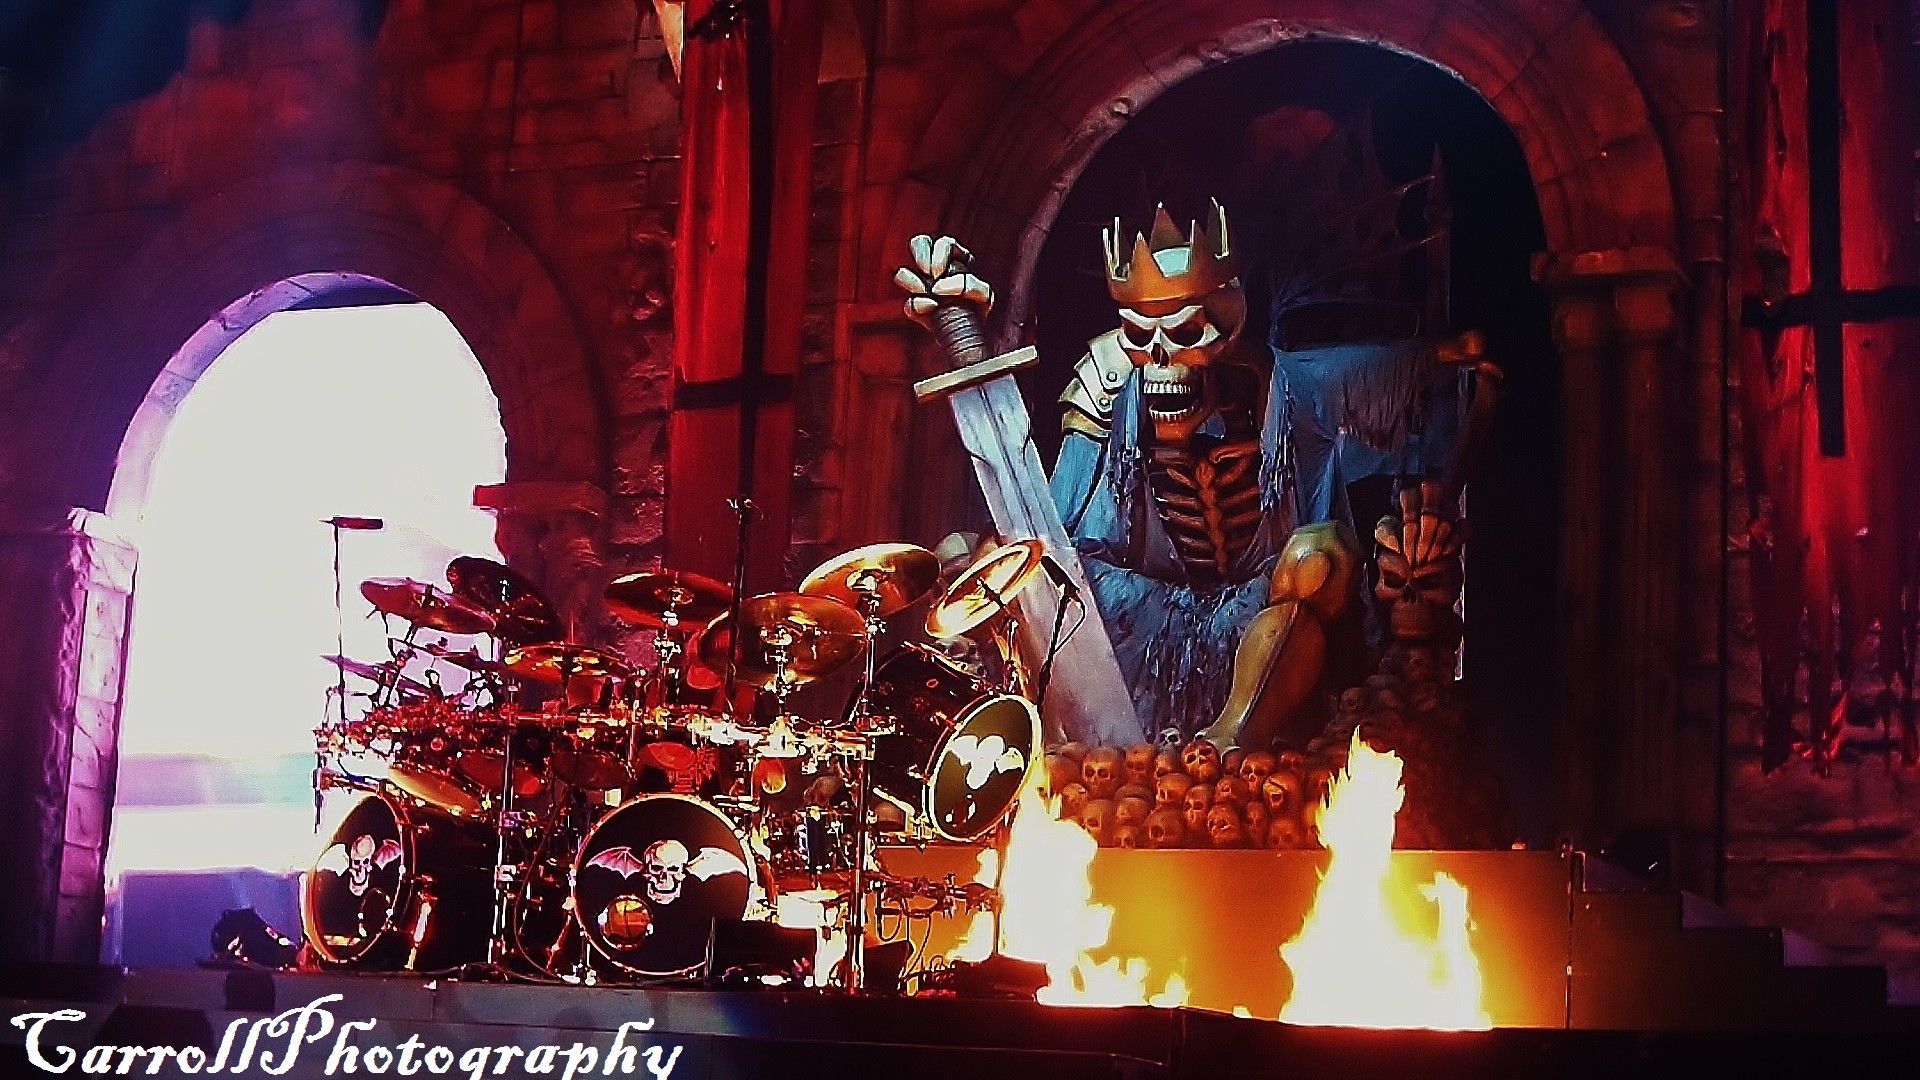 1920x1080 Avenged Sevenfold bring the heat to Hershey Giant Center.